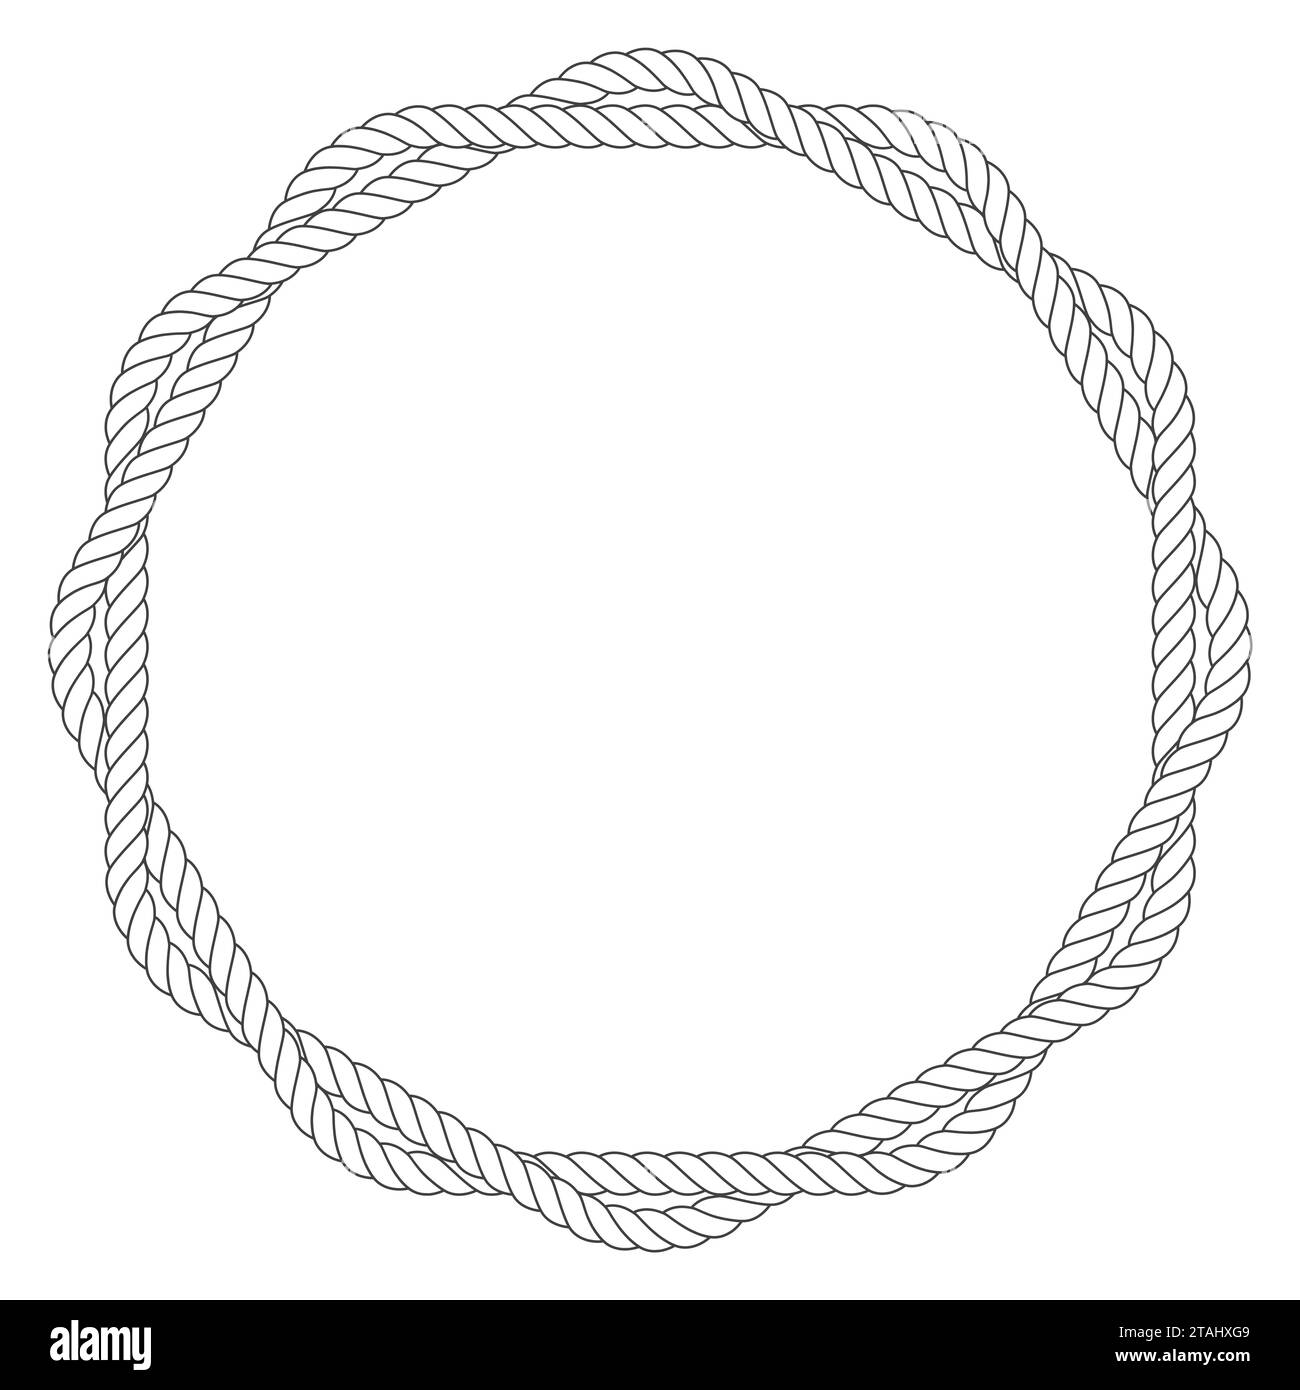 Rope circle Black and White Stock Photos & Images - Alamy